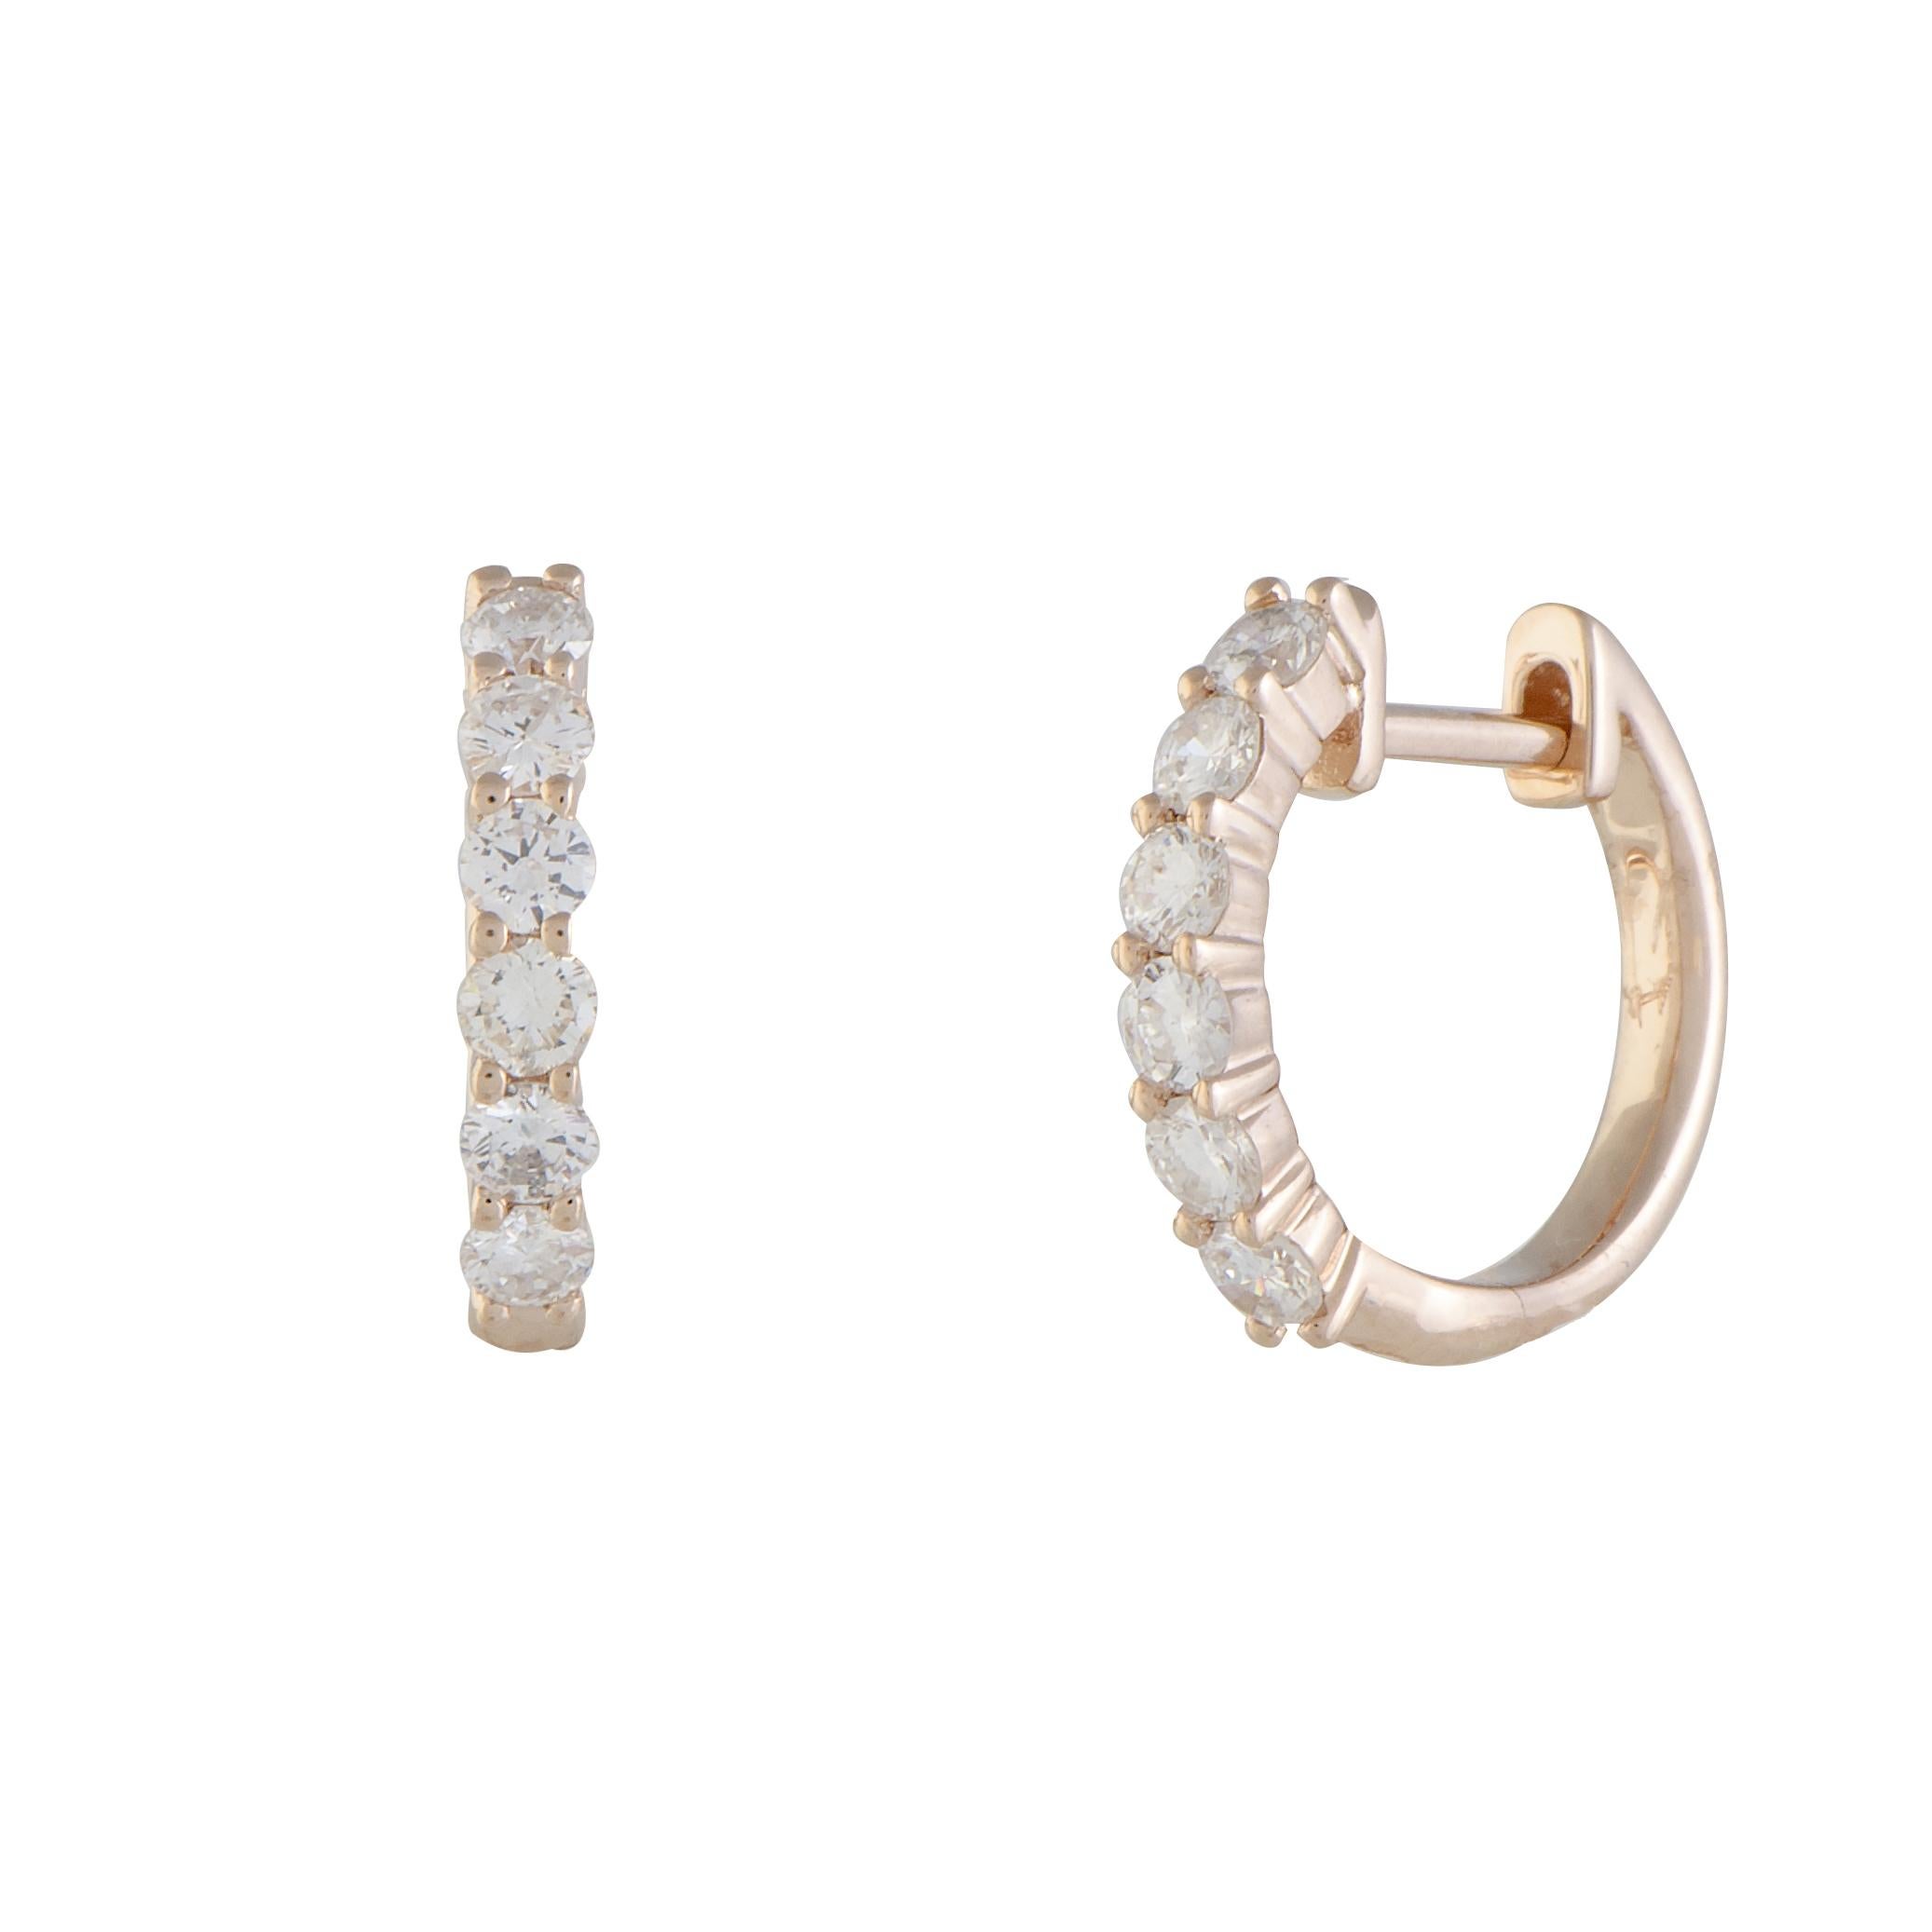 Offering a fabulously feminine allure with their gorgeously radiant 14K rose gold and lavishly sparkling diamonds amounting to 0.75 ct, these marvelous earrings are items of exceptional taste and perfectionist quality.